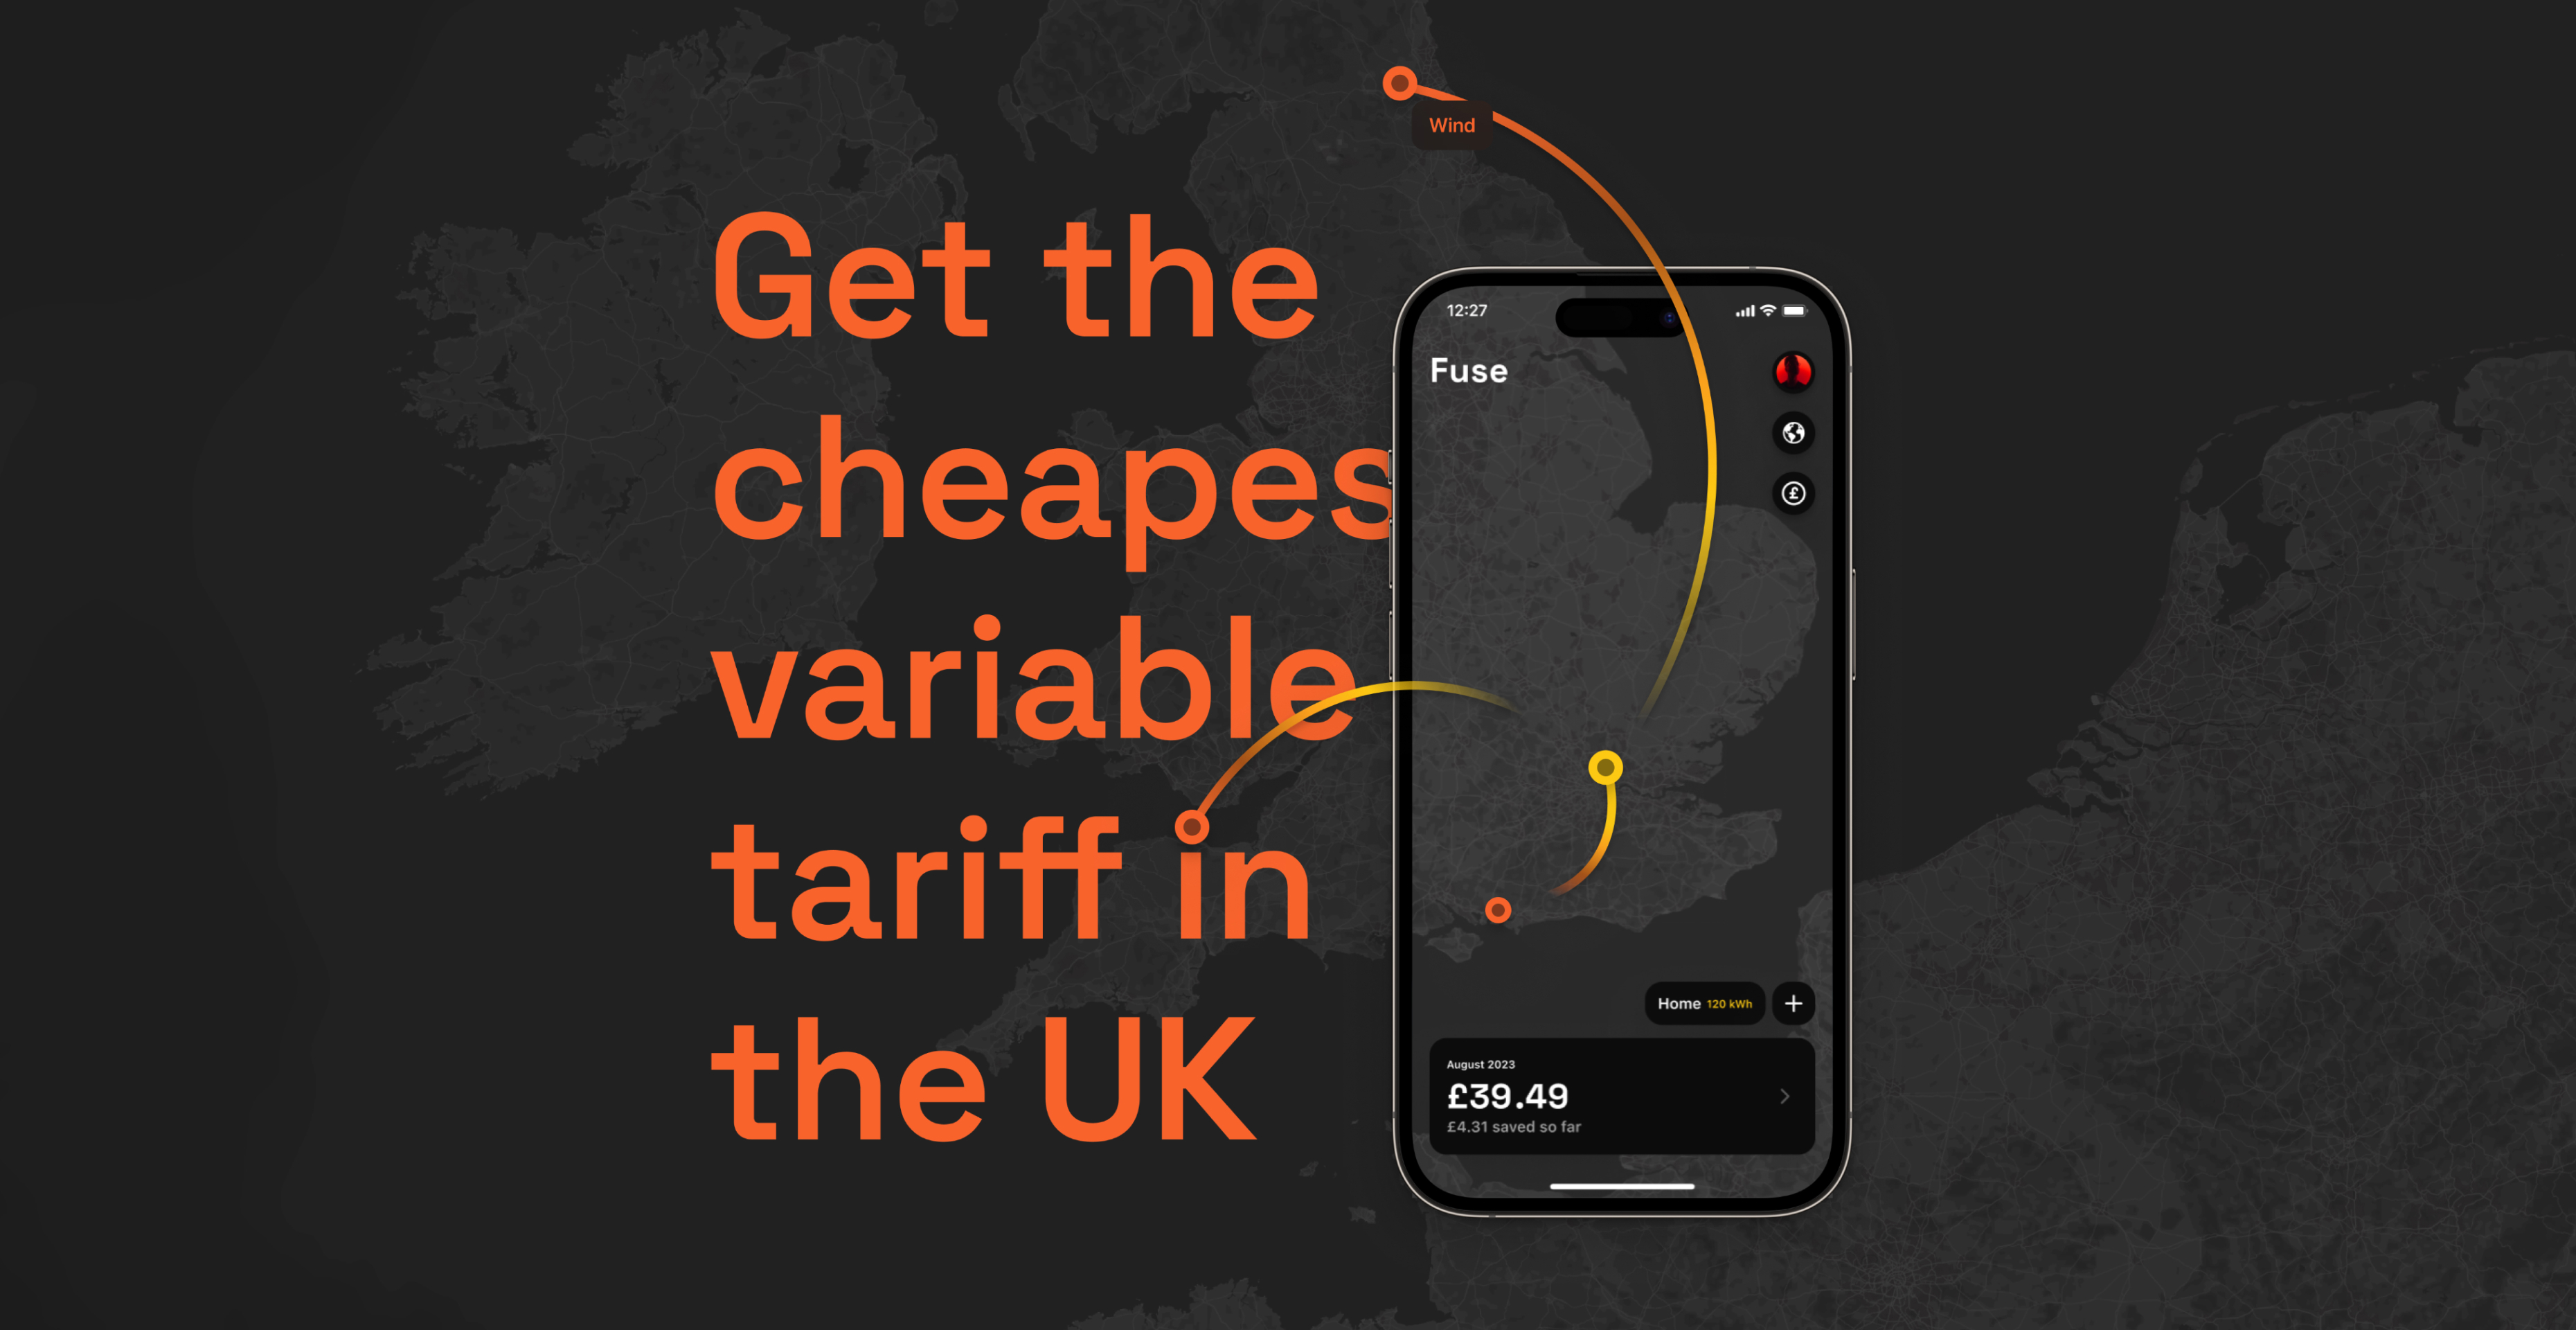 Save Â£50 with cheapert variable tariff in the UK